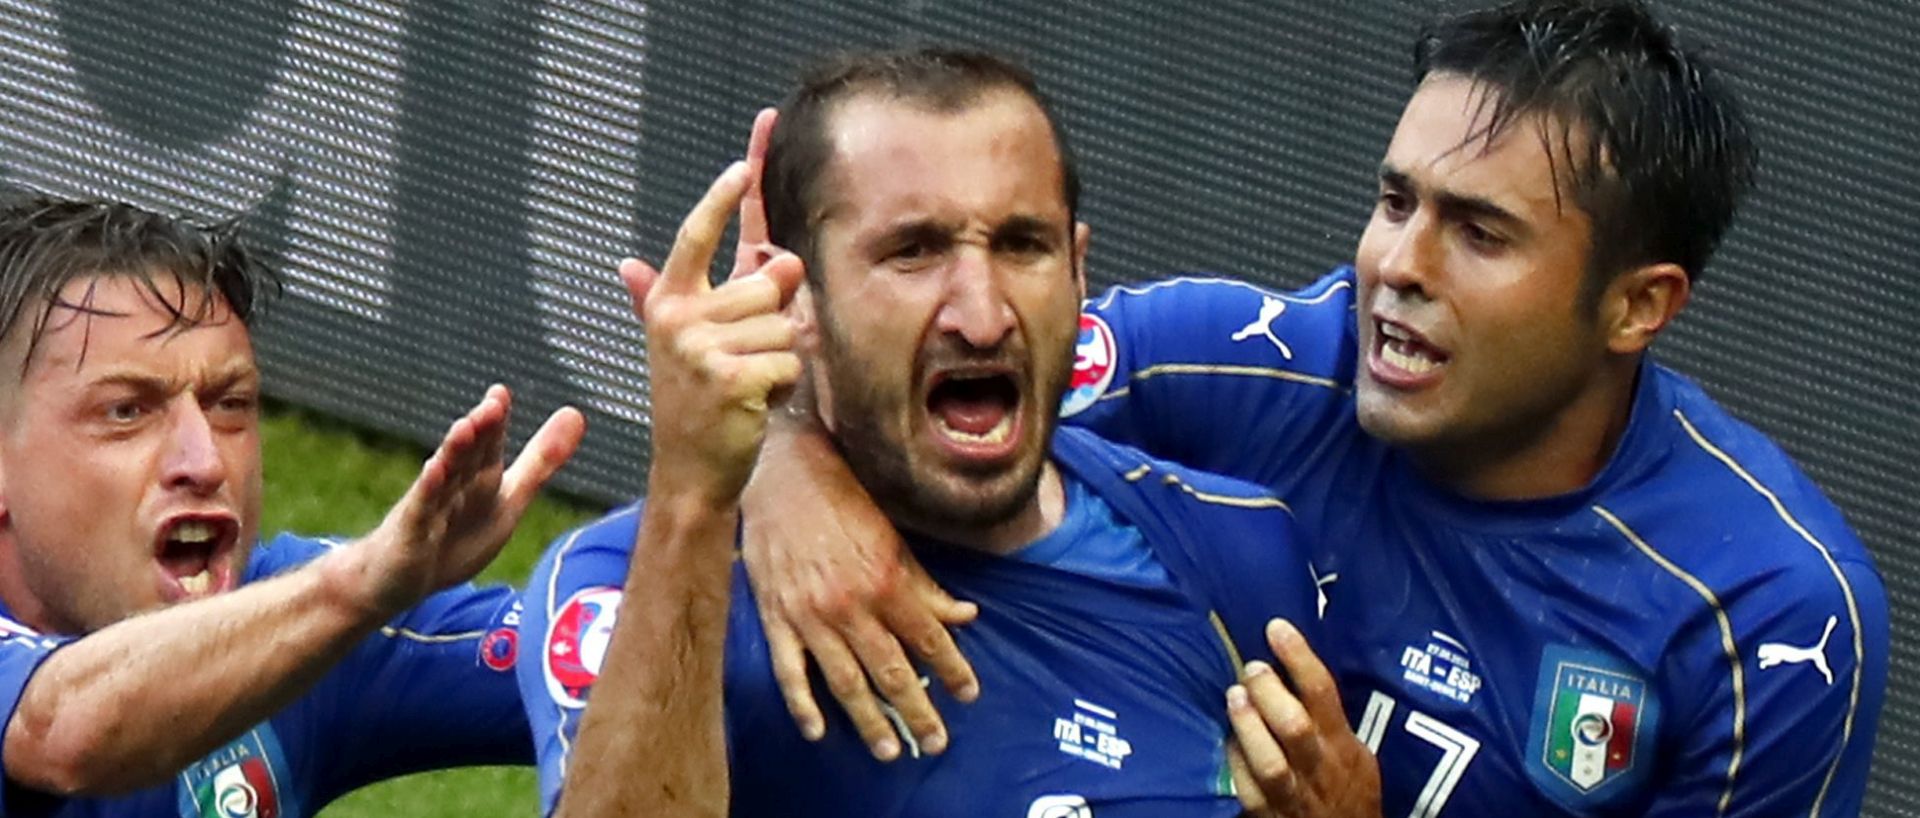 epa05394626 Giorgio Chiellini (C) of Italy celebrates with teammates Eder (R) and Emanuele Giaccherini after scoring the 1-0 goal during the UEFA EURO 2016 round of 16 match between Italy and Spain at Stade de France in St. Denis, France, 27 June 2016.


(RESTRICTIONS APPLY: For editorial news reporting purposes only. Not used for commercial or marketing purposes without prior written approval of UEFA. Images must appear as still images and must not emulate match action video footage. Photographs published in online publications (whether via the Internet or otherwise) shall have an interval of at least 20 seconds between the posting.)  EPA/IAN LANGSDON   EDITORIAL USE ONLY